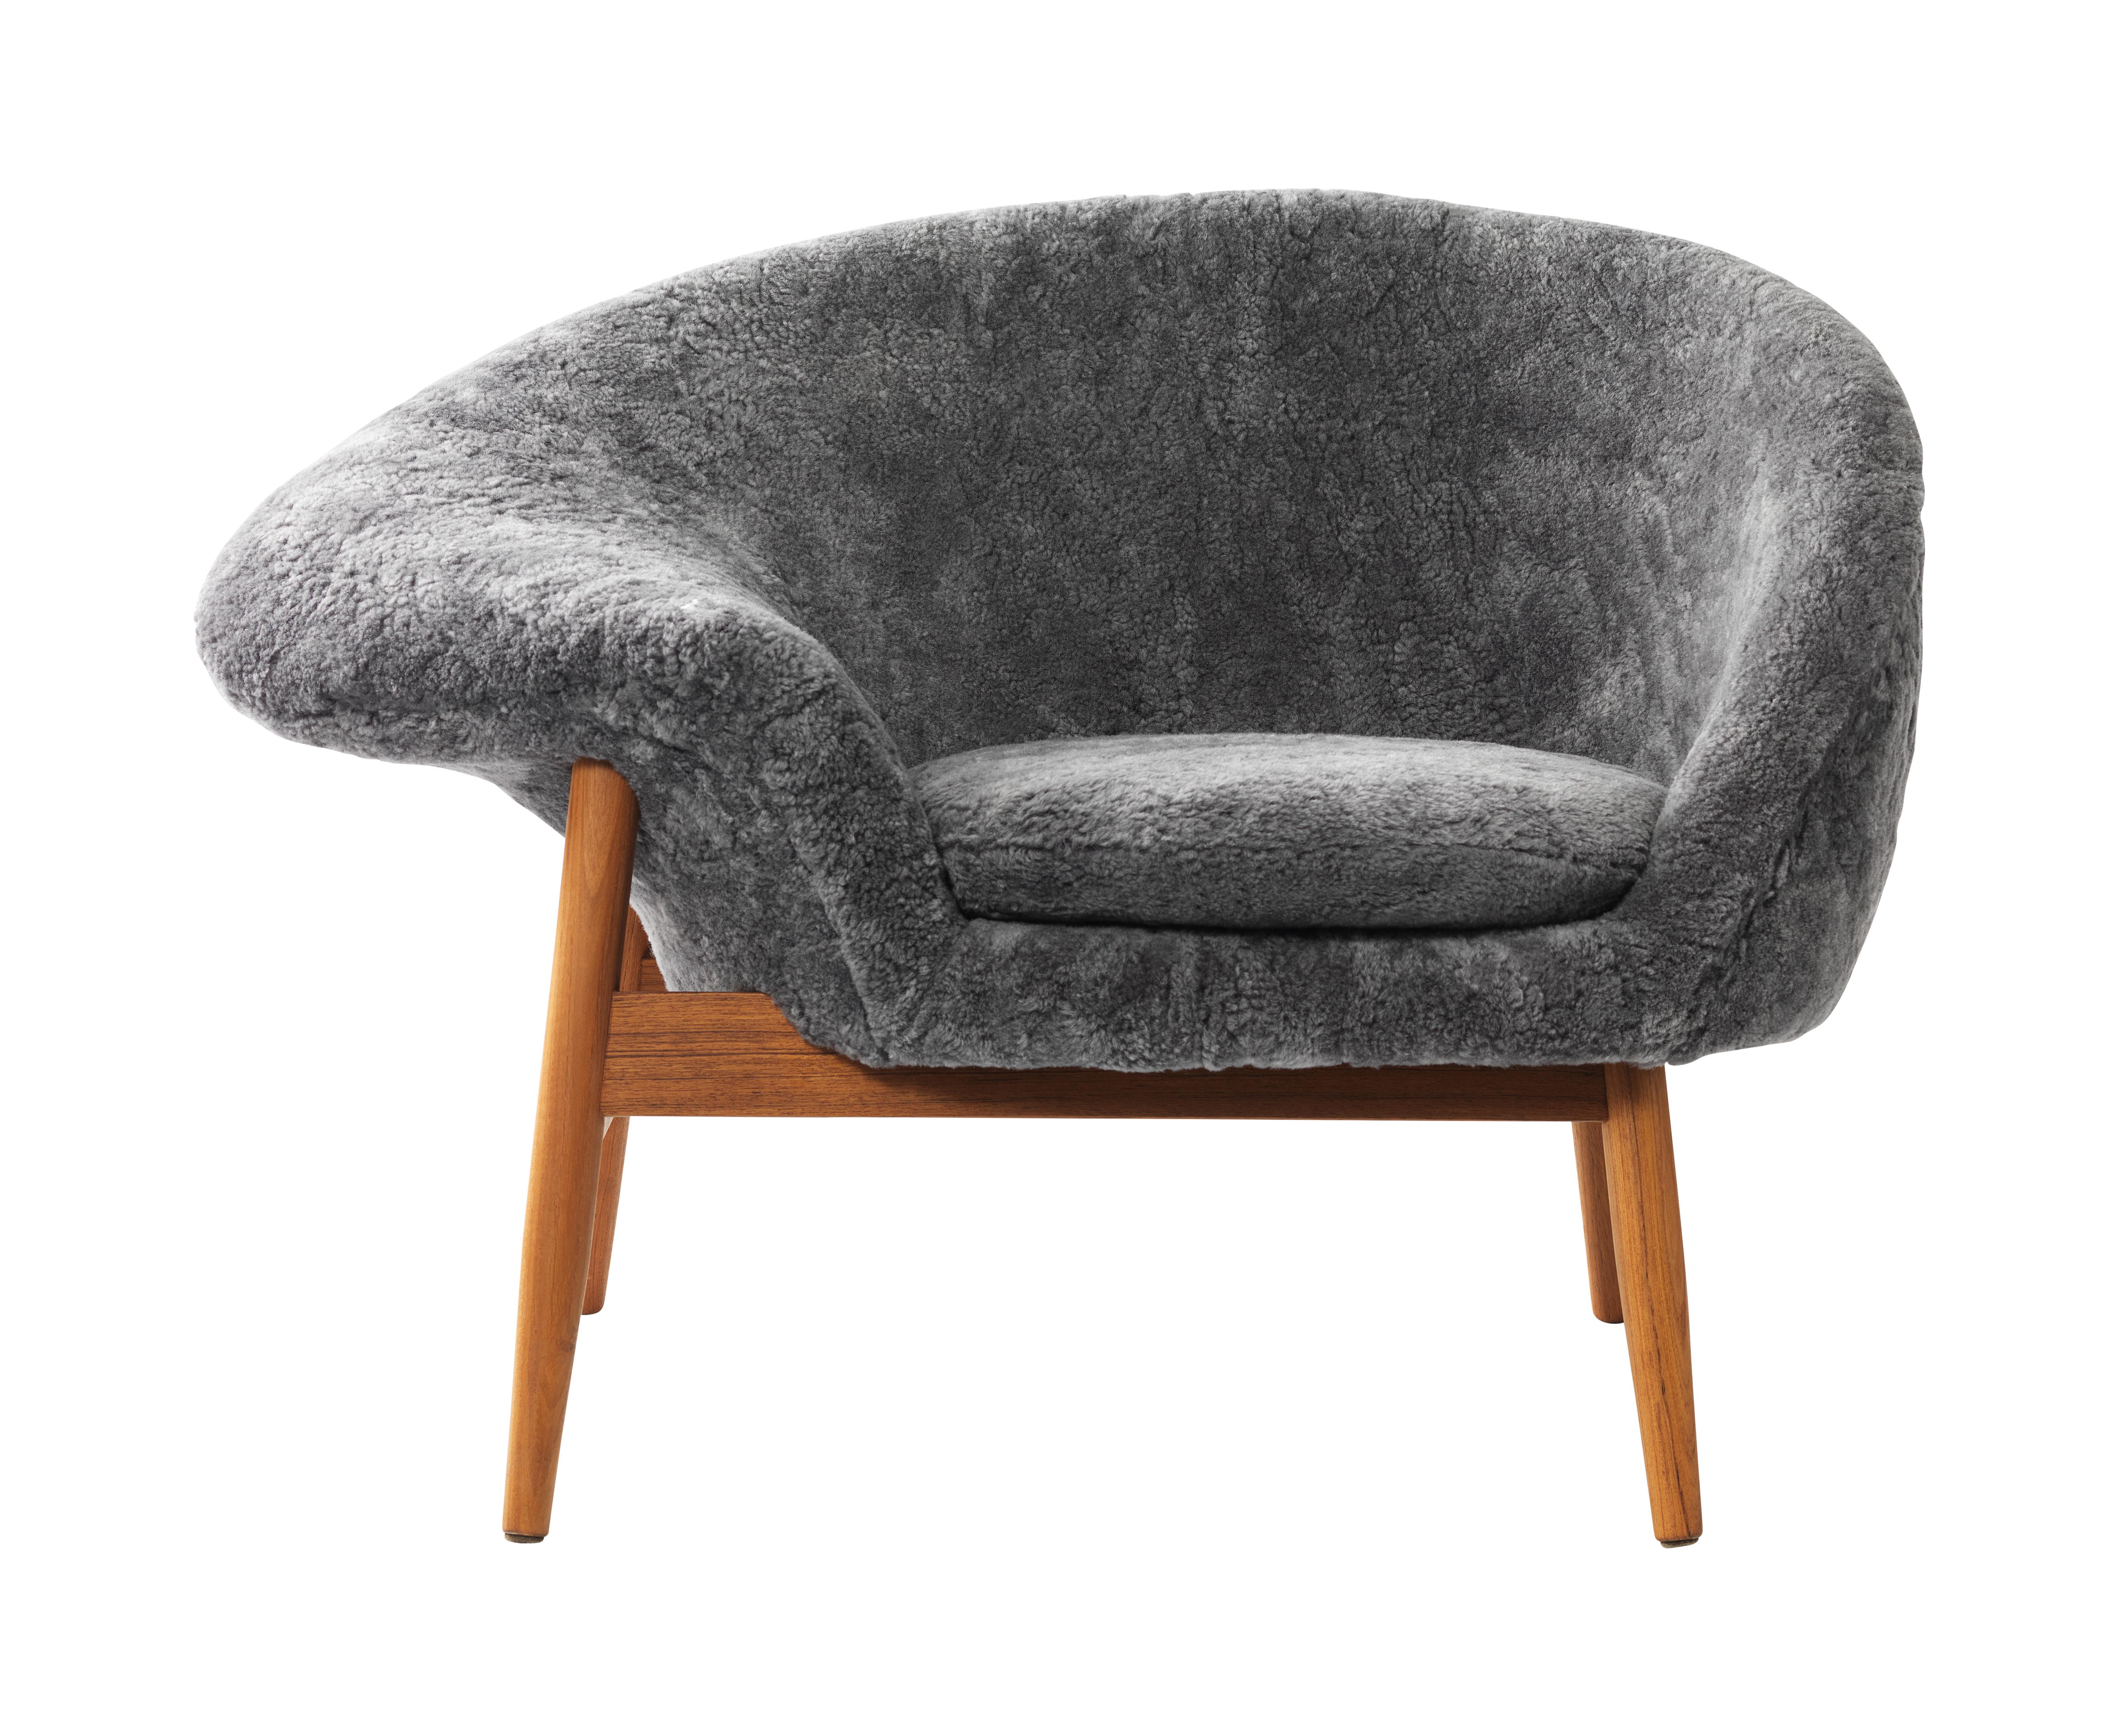 For Sale: Gray (Sheep Scandinavian Grey) Fried Egg Chair Sheep Chair, by Hans Olsen from Warm Nordic